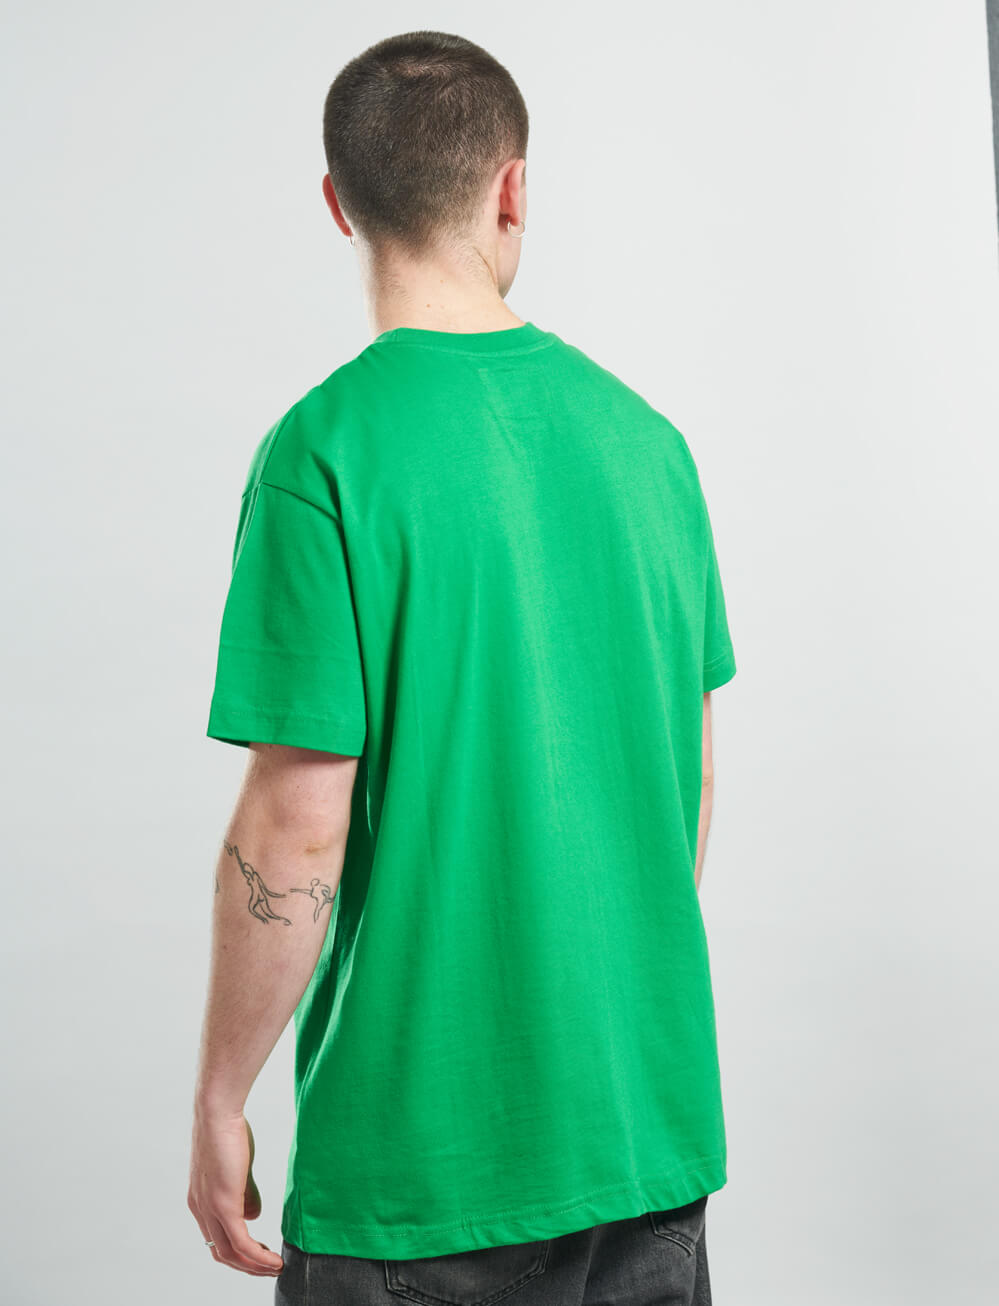 Official Celtic Graphic T-Shirt - Green - The World Football Store